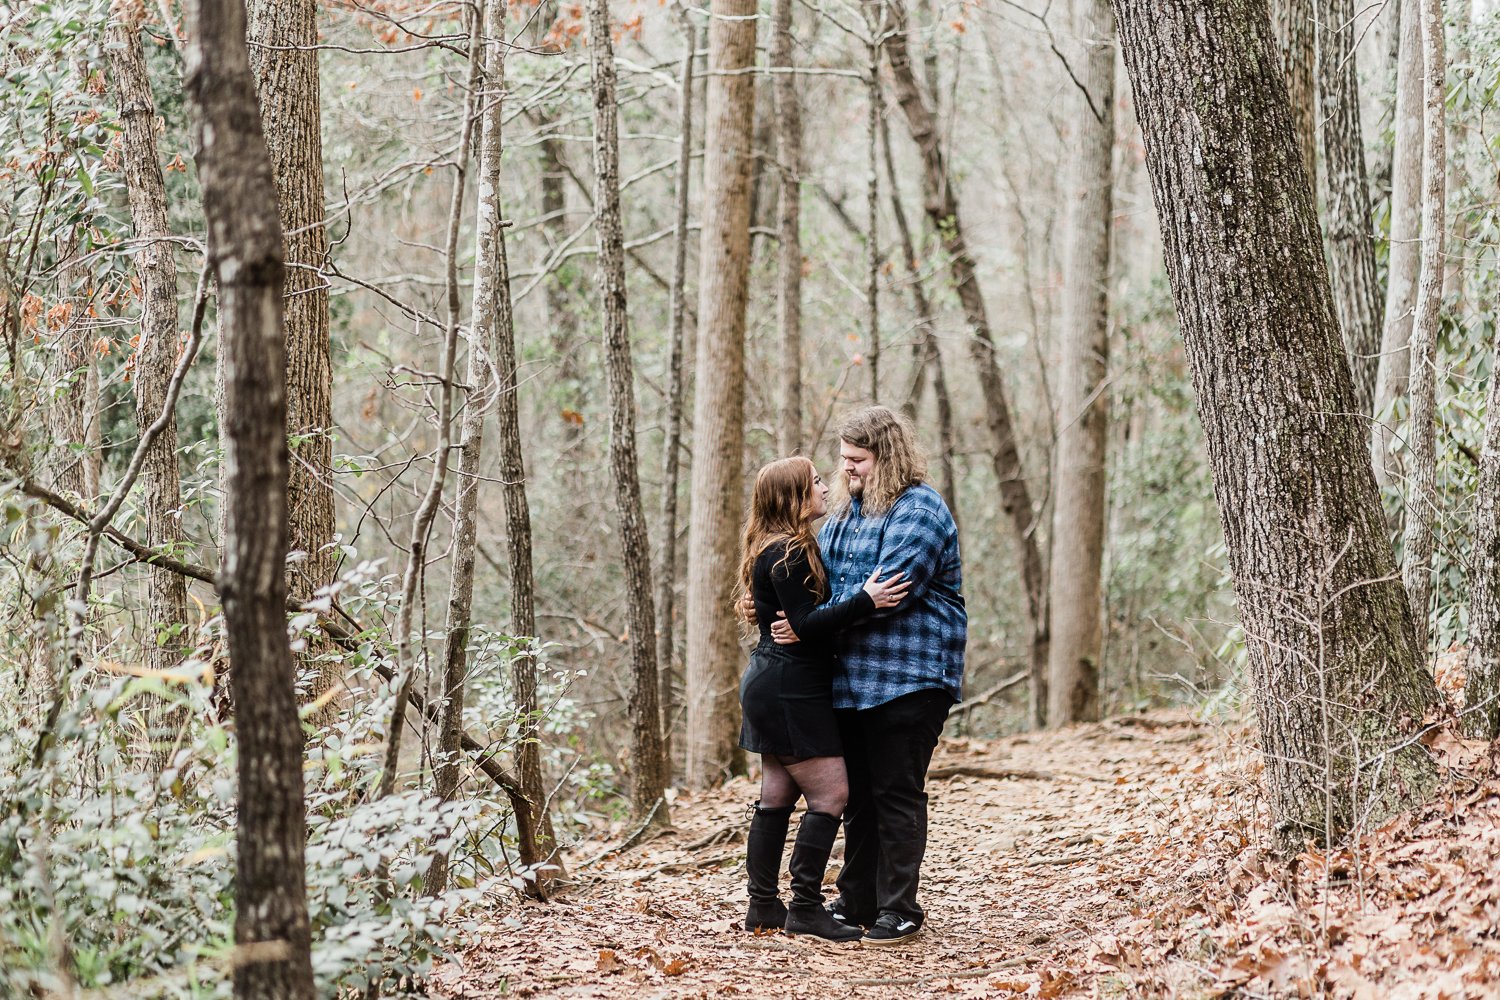 5 of the best places to take engagment photos in greenville sc-5.jpg